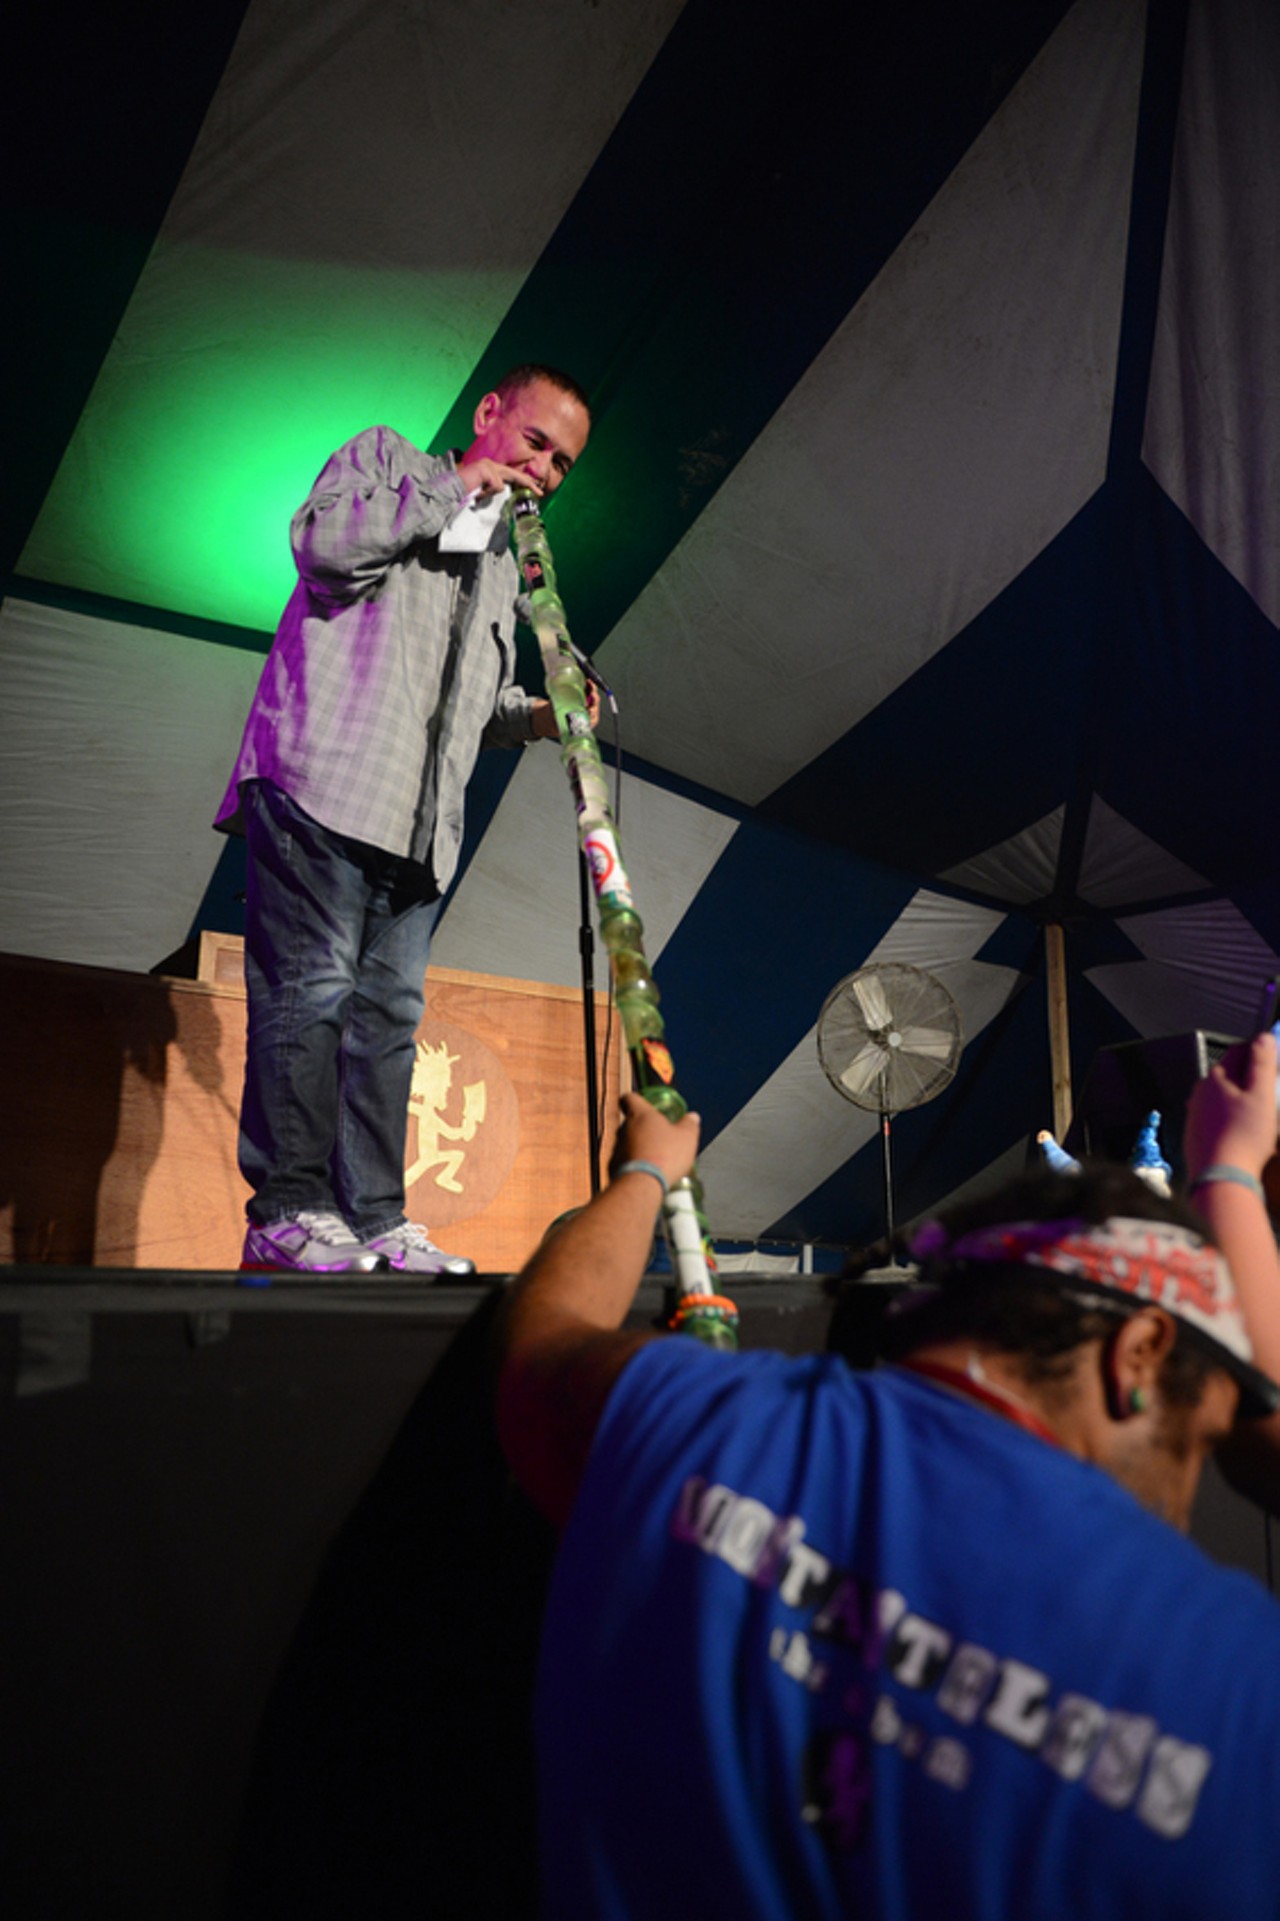 Milk Showers and Gilbert Gottfried: Day 3 at the Gathering of the Juggalos